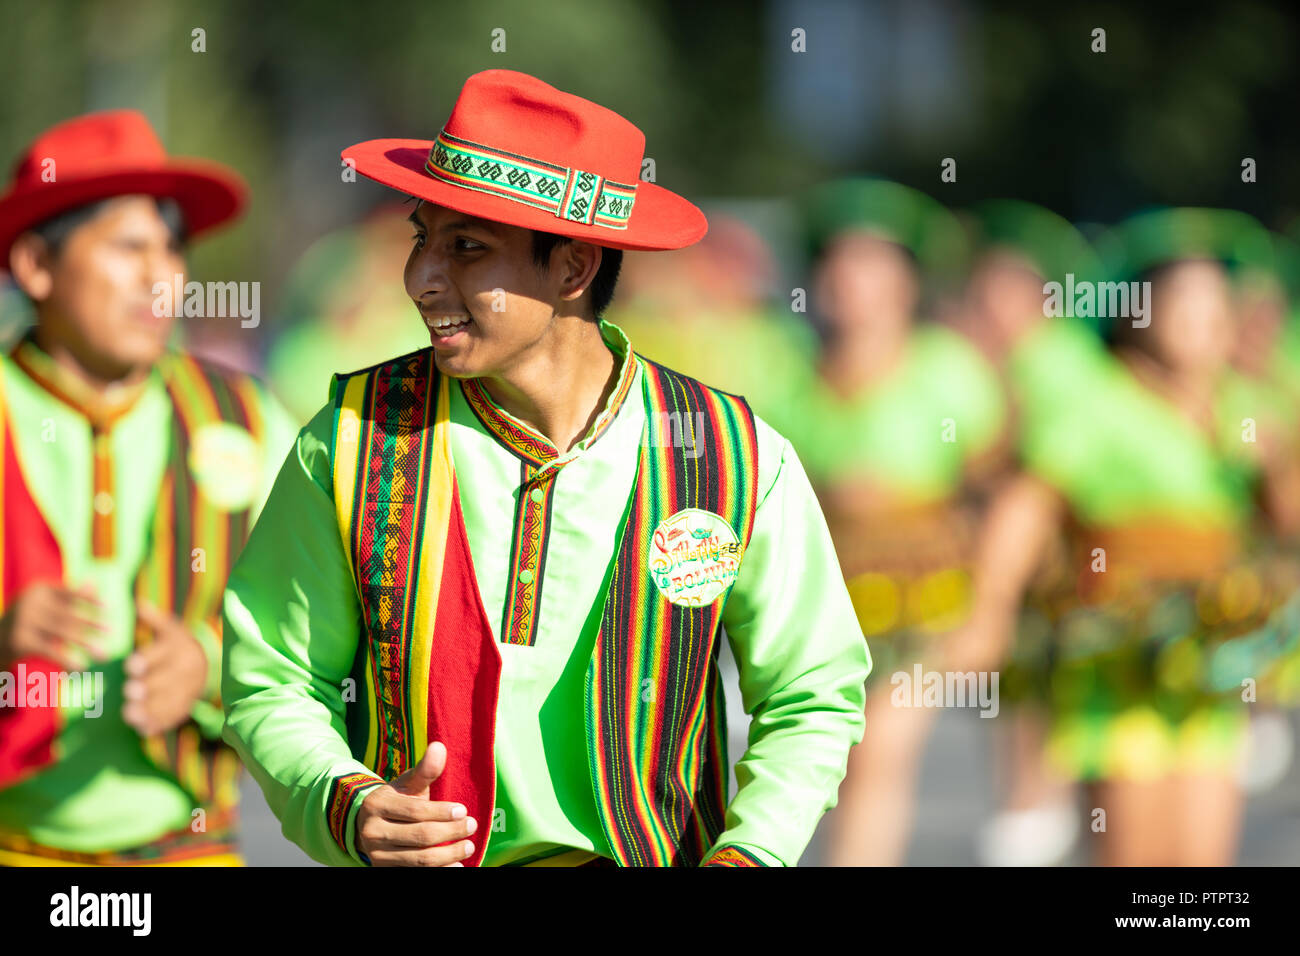 Washington, D.C., USA - September 29, 2018: The Fiesta DC Parade, Bolivian men wearing traditional clothing performing a traditional Bolivian dance Stock Photo